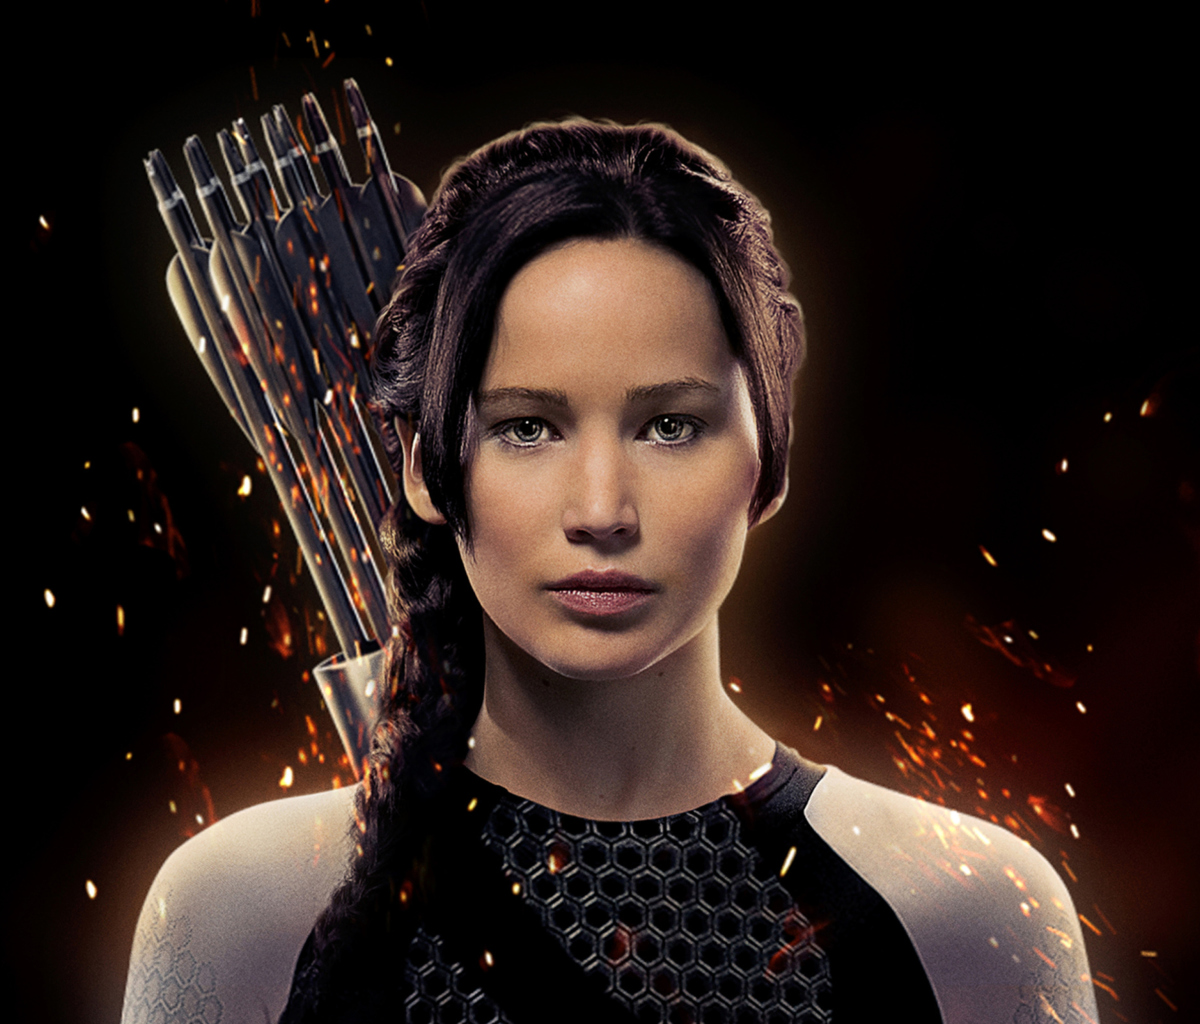 The Hunger Games: Catching Fire wallpaper 1200x1024